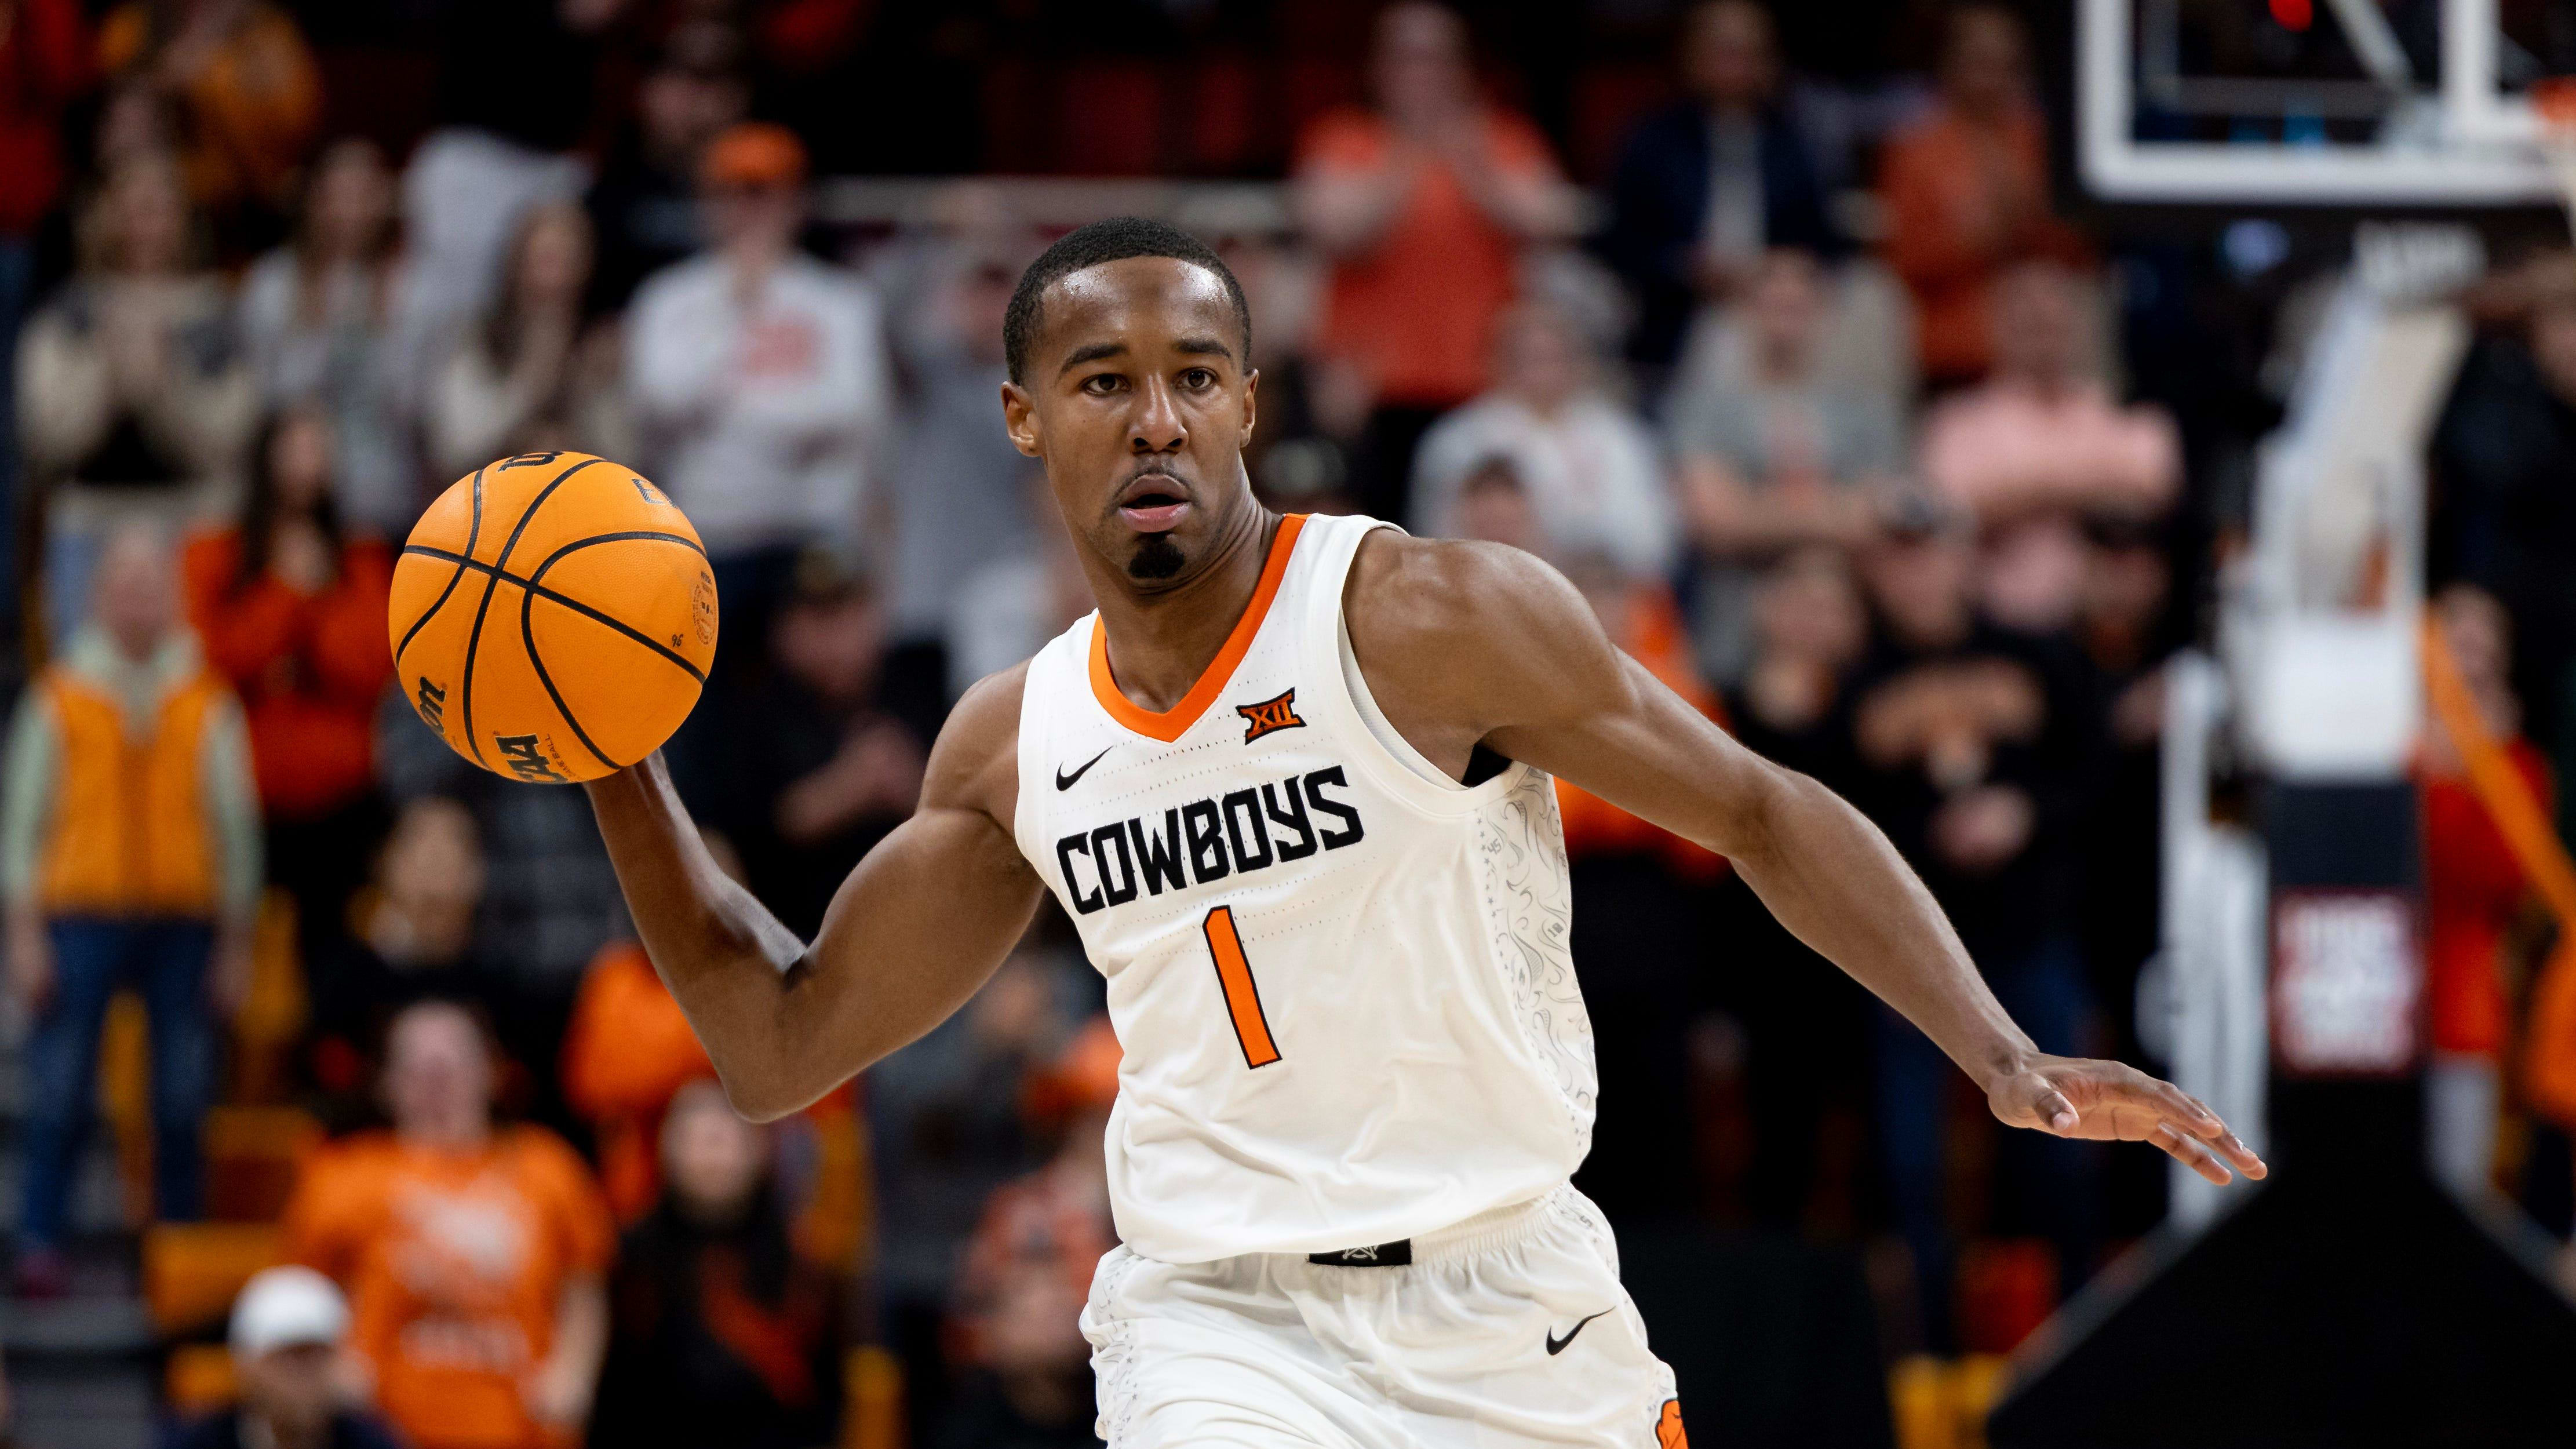 Star Bryce Thompson to Return for Oklahoma State Basketball Under New Coach Lutz